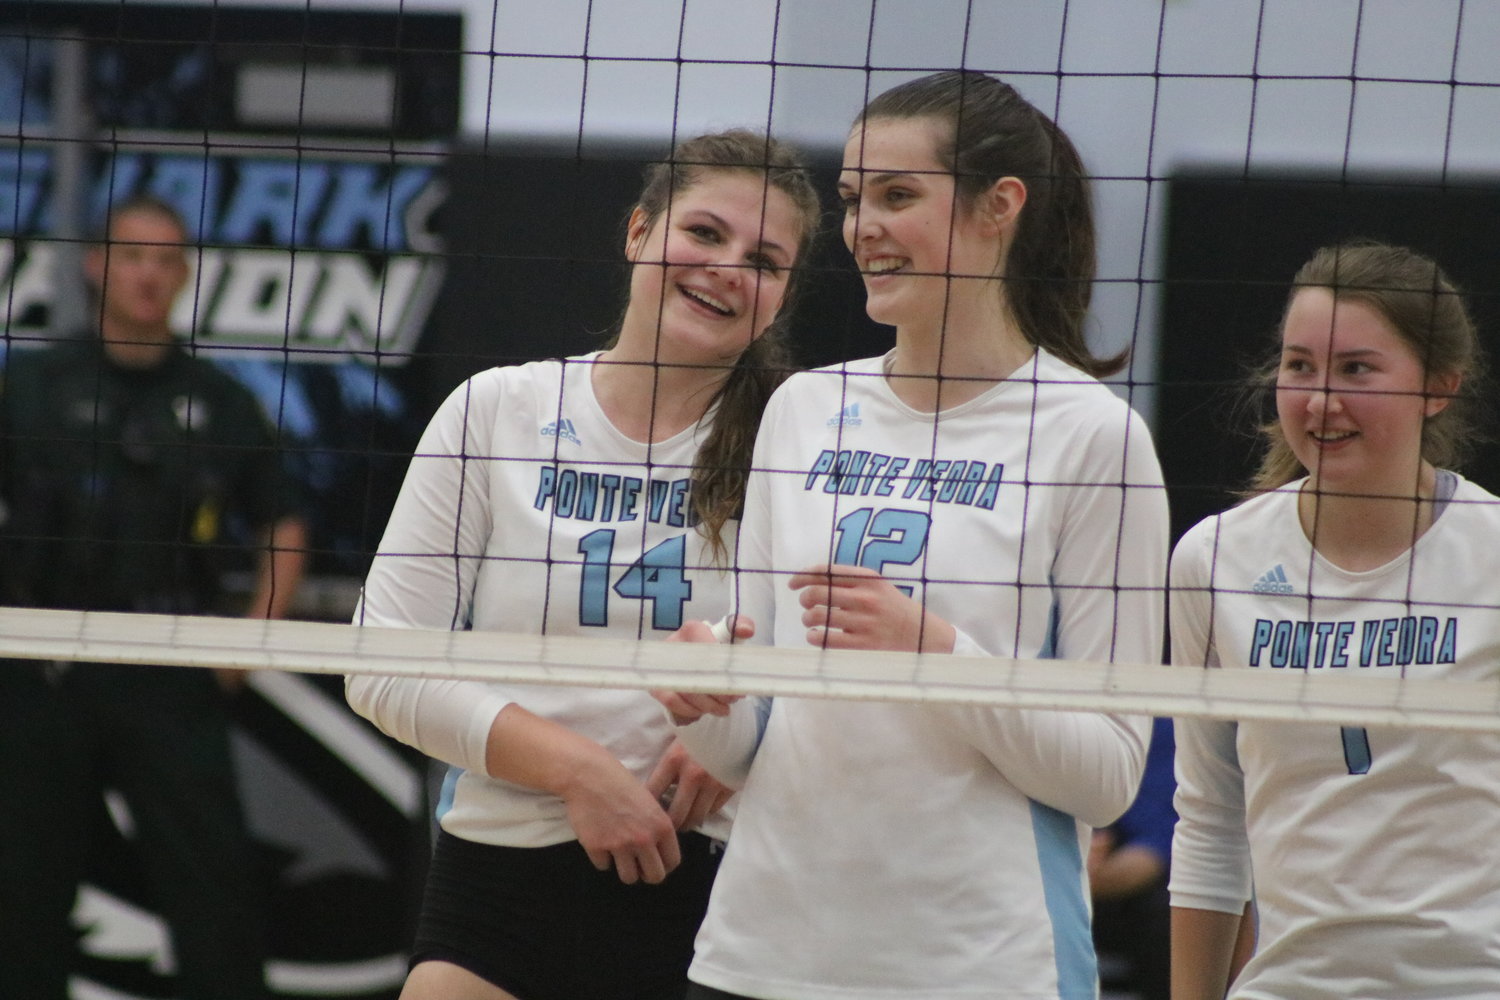 Rachel Johnson (No. 14) shares a laugh with Chelsea Sutton (No. 12) and Ava Grall (No. 1) at the net.